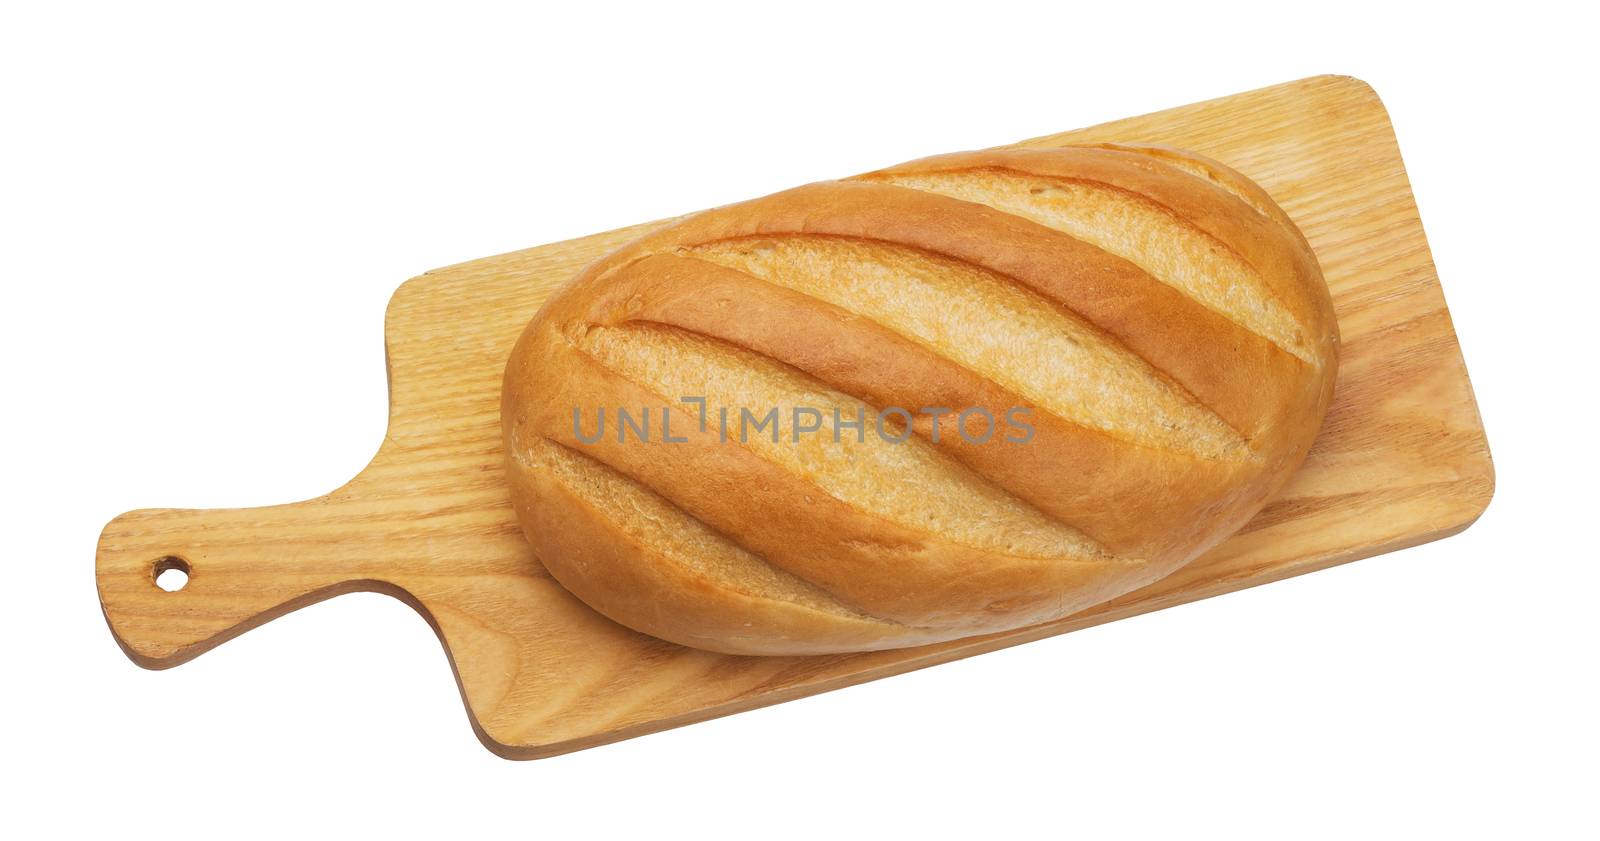 Long loaf on wooden cutting board isolated on white background with clipping path, top view